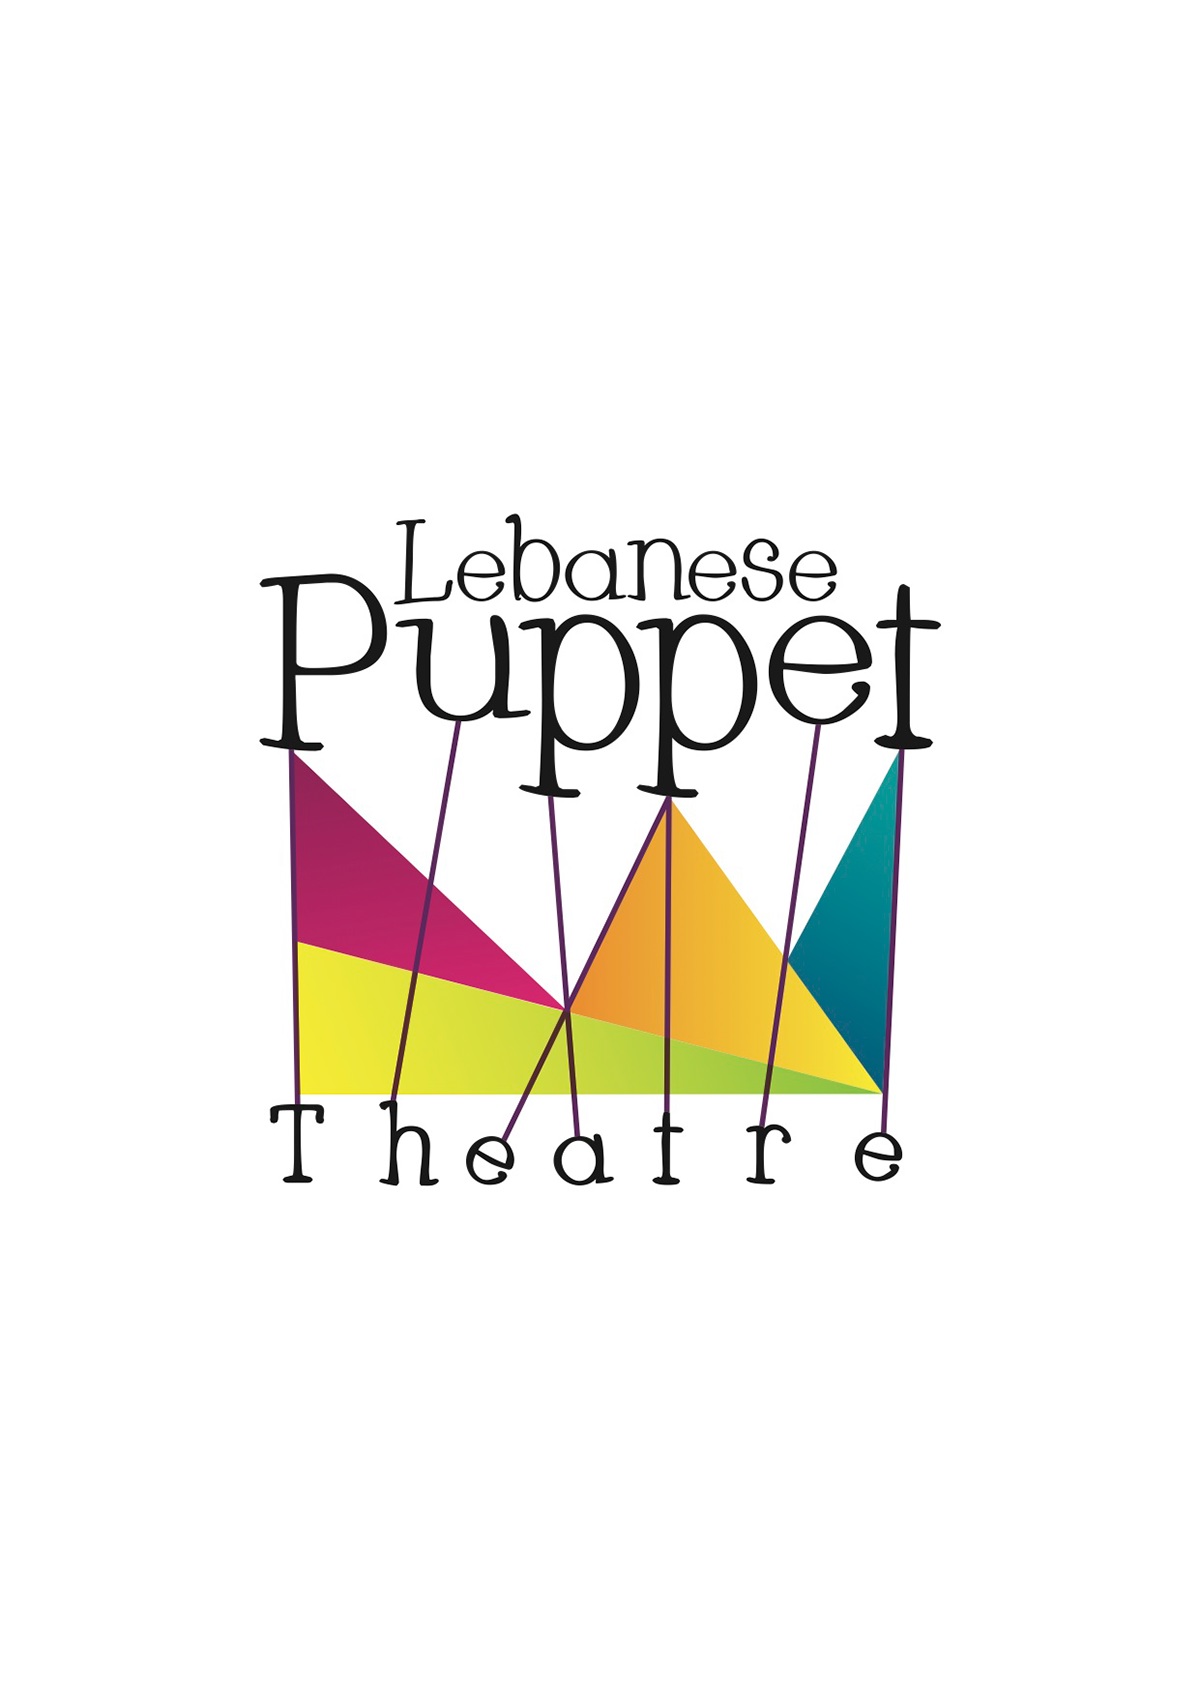 puppet Theatre campaign kids Entertainment storytelling  